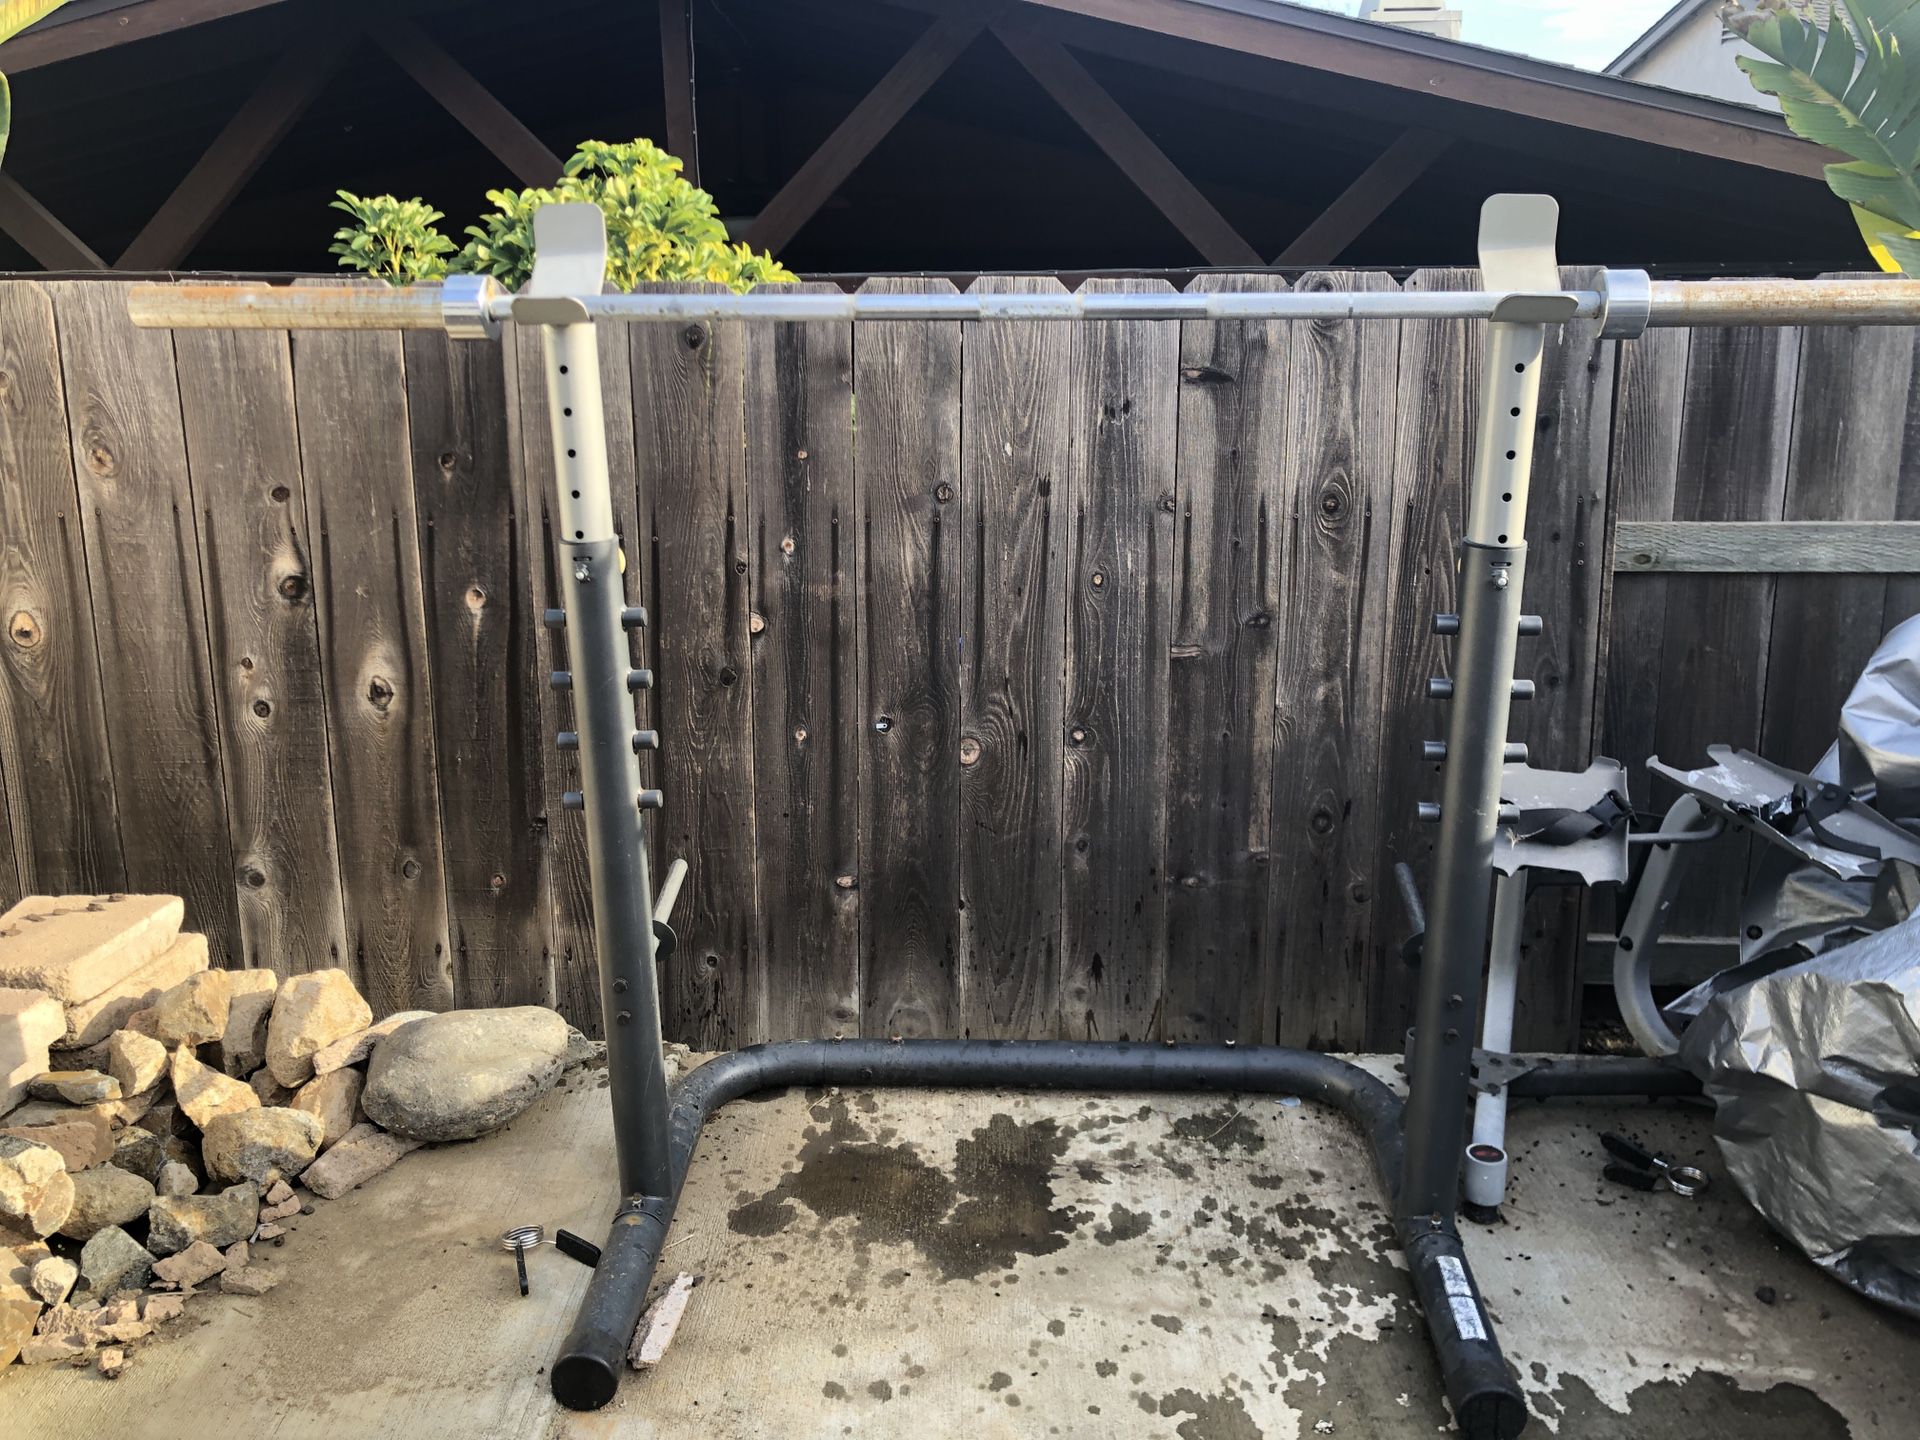 Golds gym squat rack and Weider weights